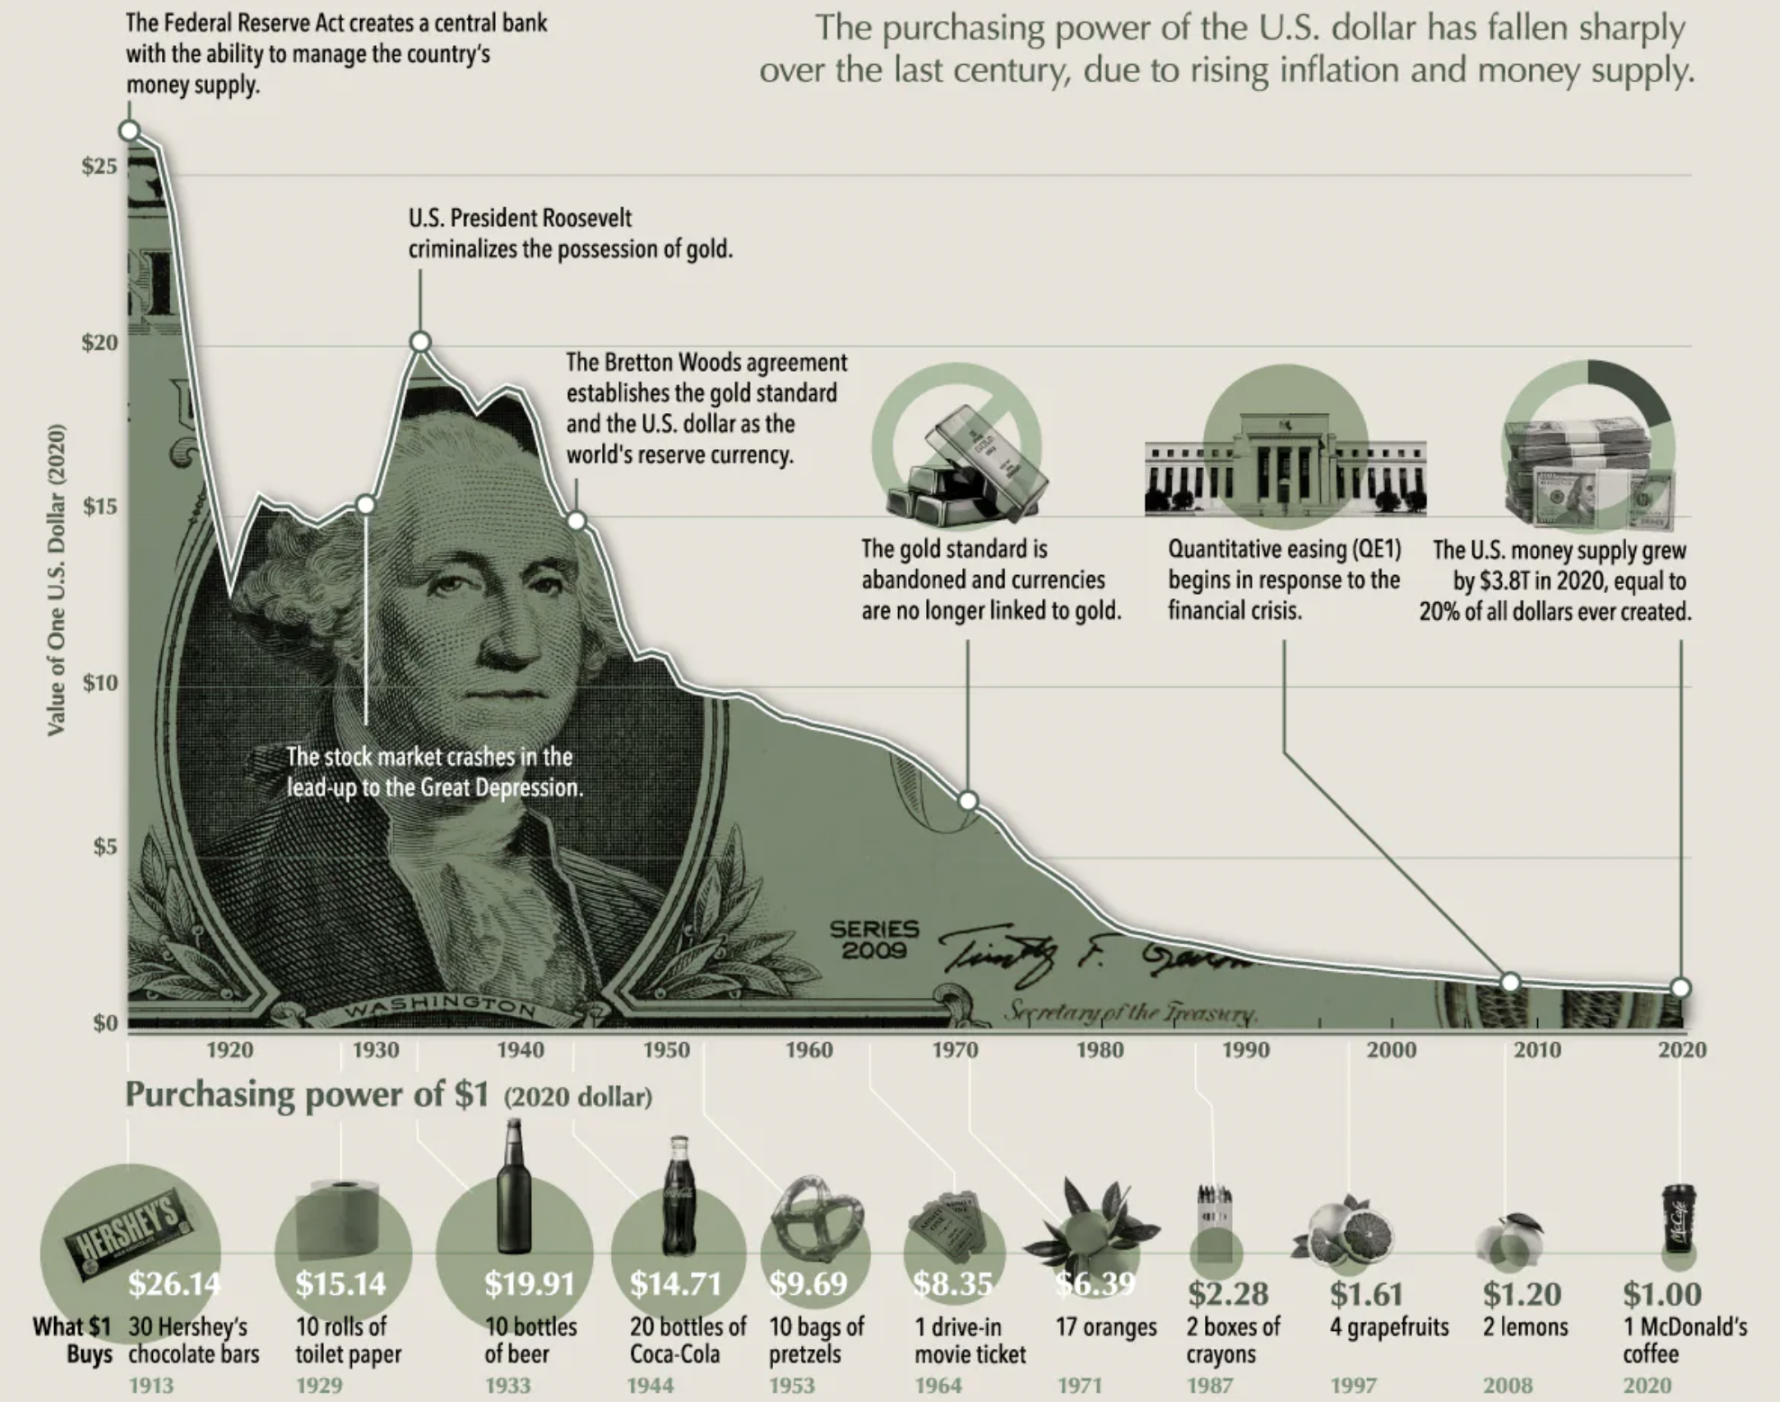 https://www.visualcapitalist.com/purchasing-power-of-the-u-s-dollar-over-time/